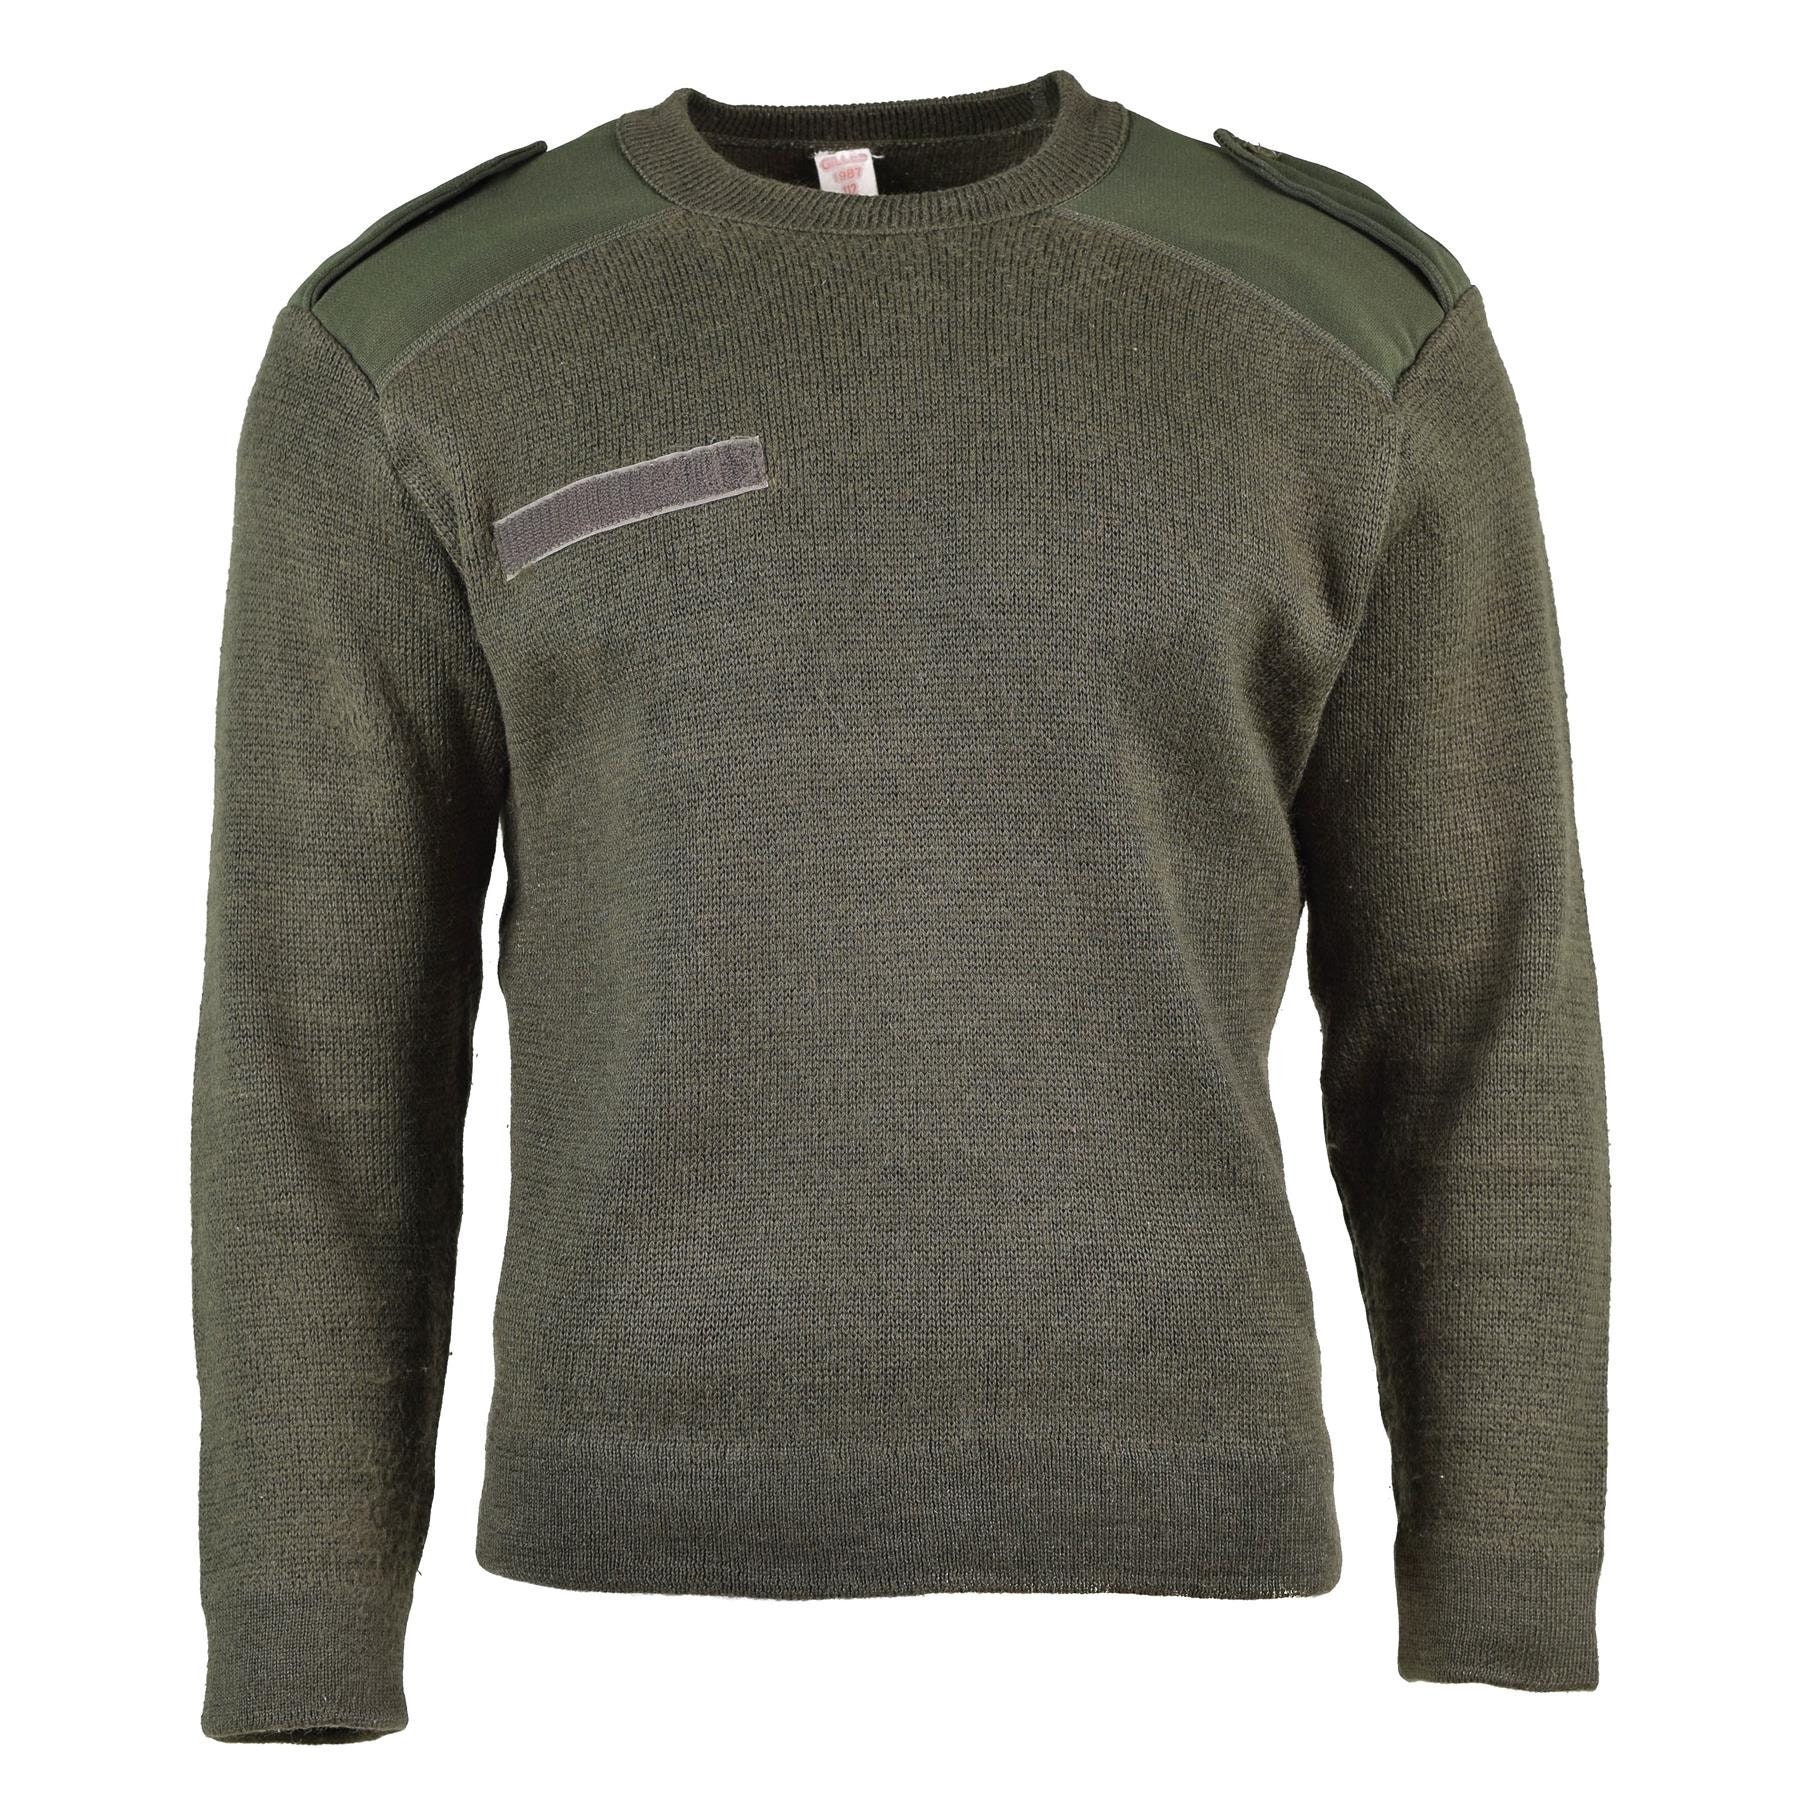 Genuine French army pullover Olive Commando Jumper Military Sweater ...